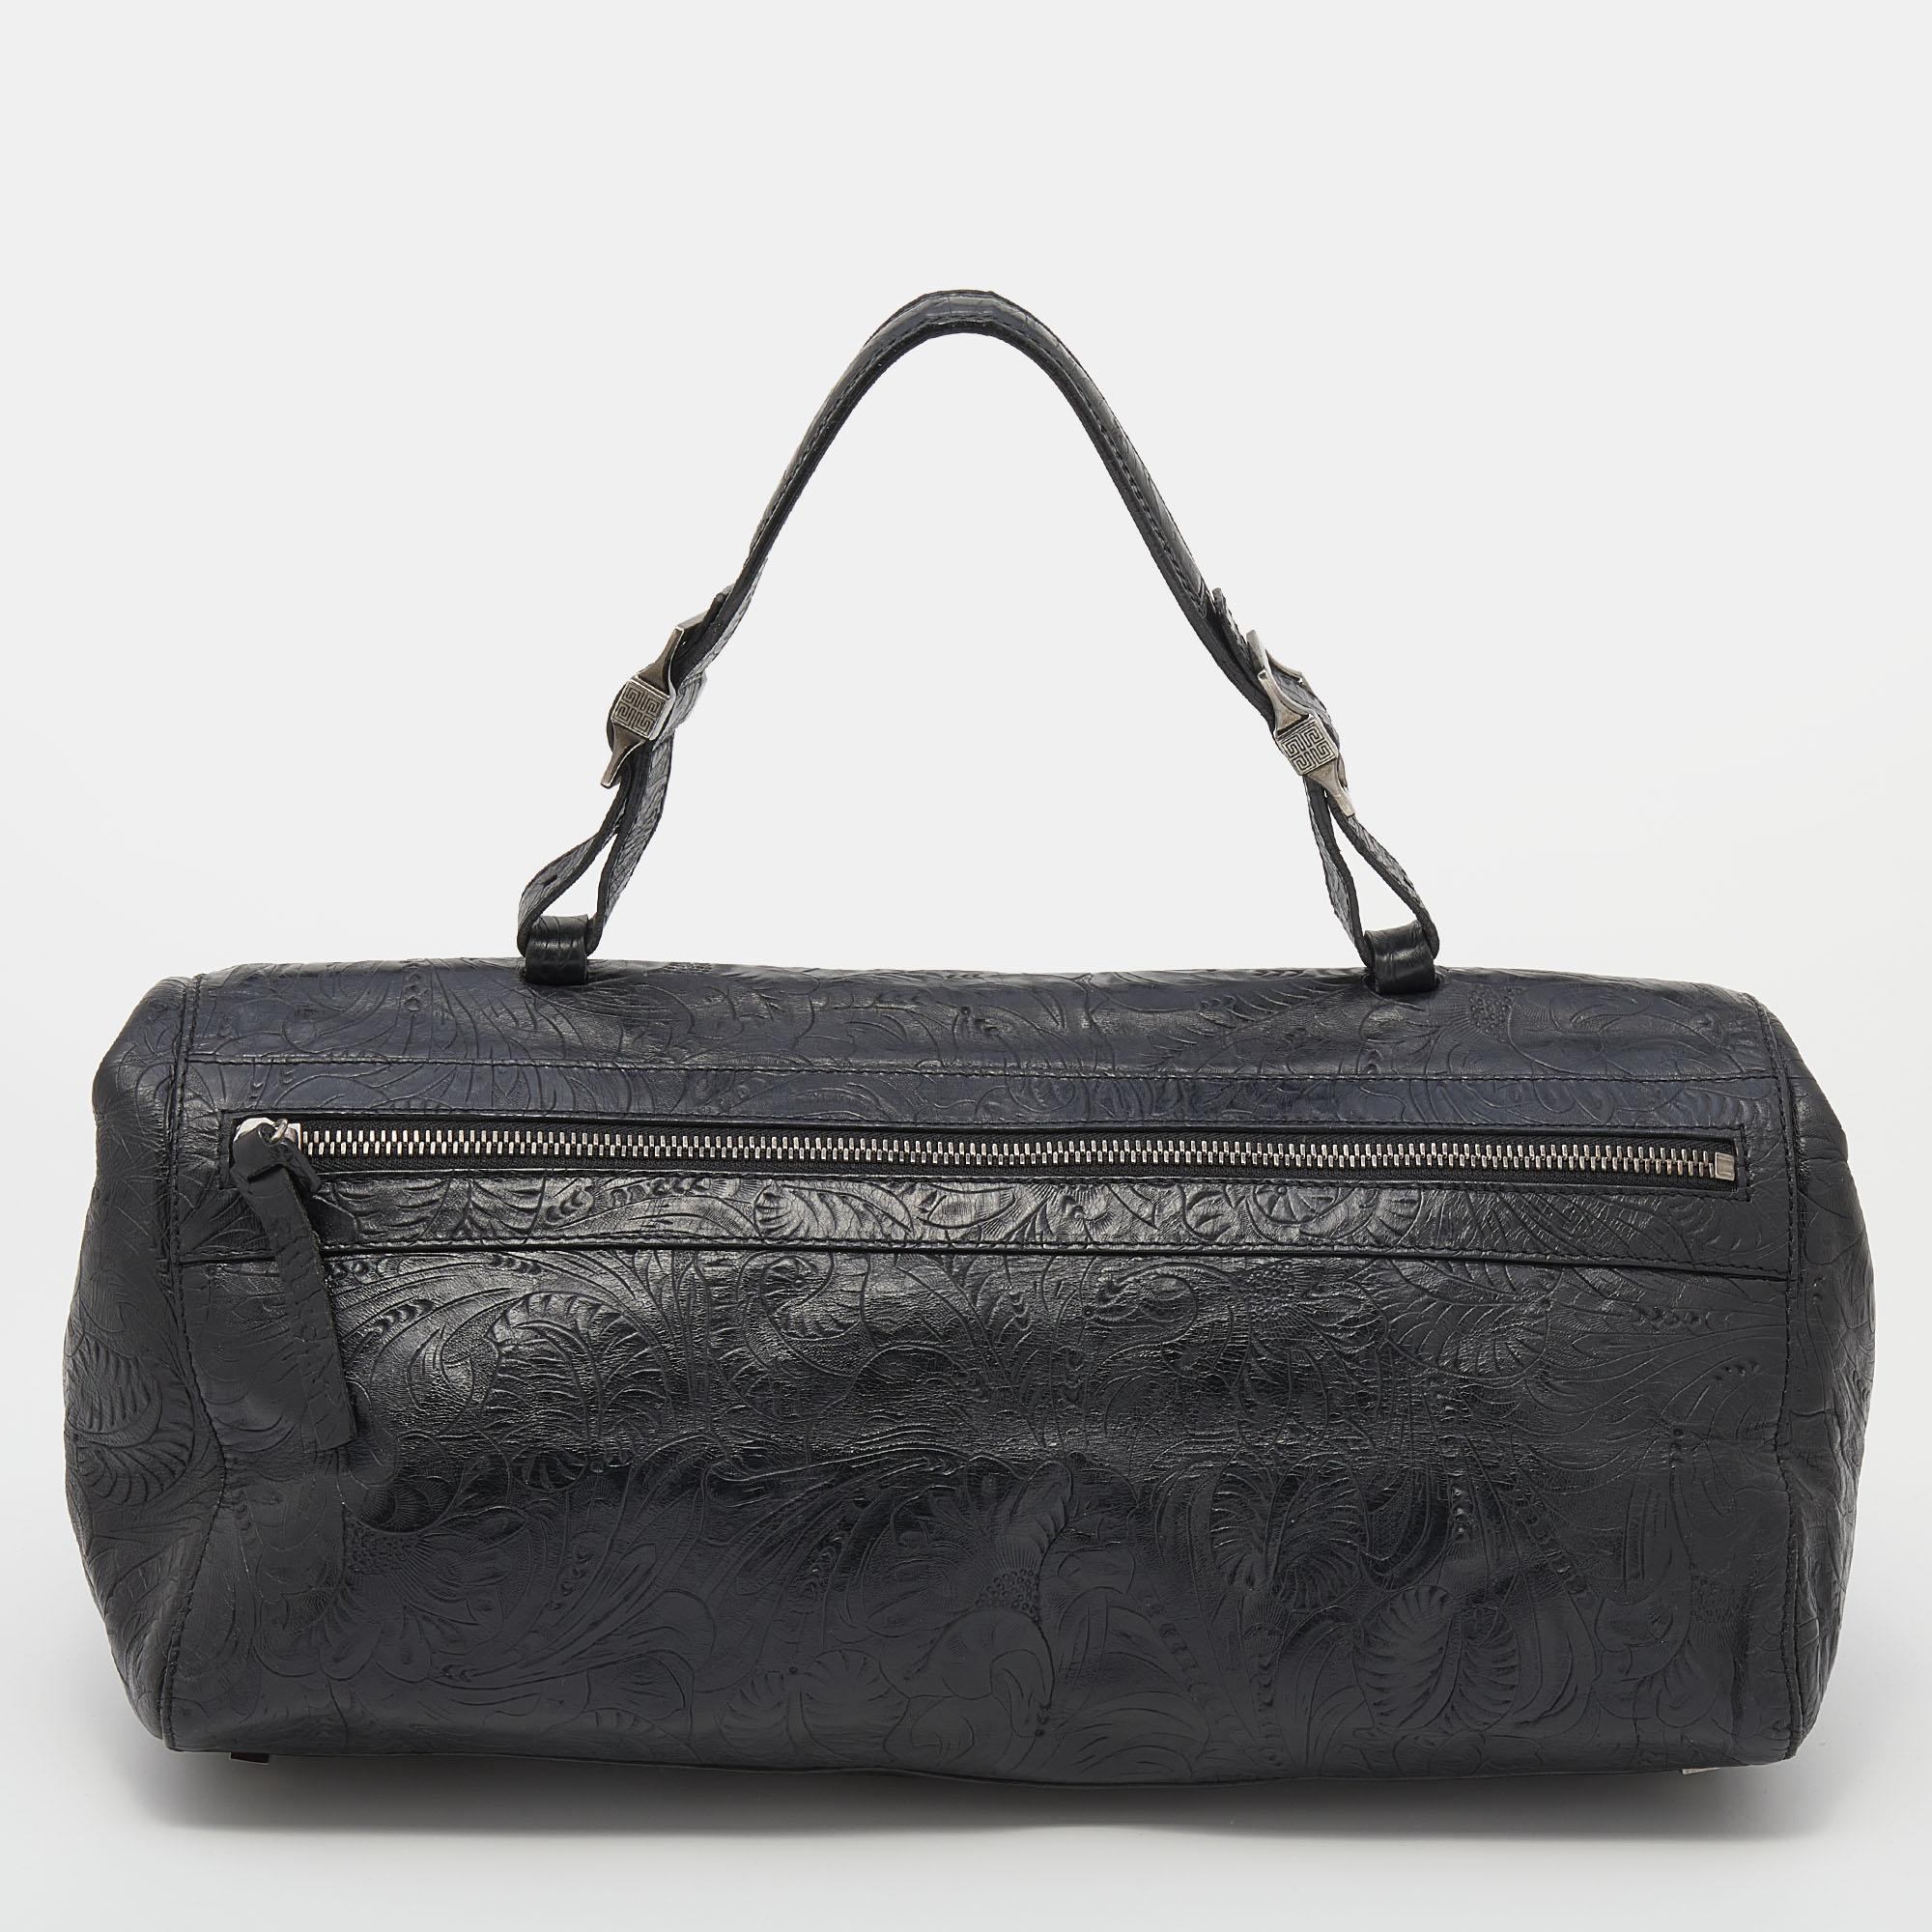 Showcasing a stunning design, this Givenchy bag offers great utility as well. Meticulously made from leather, it is embossed with paisleys and can be carried conveniently with a short handle at the top. The suede-lined interior of the bag will keep